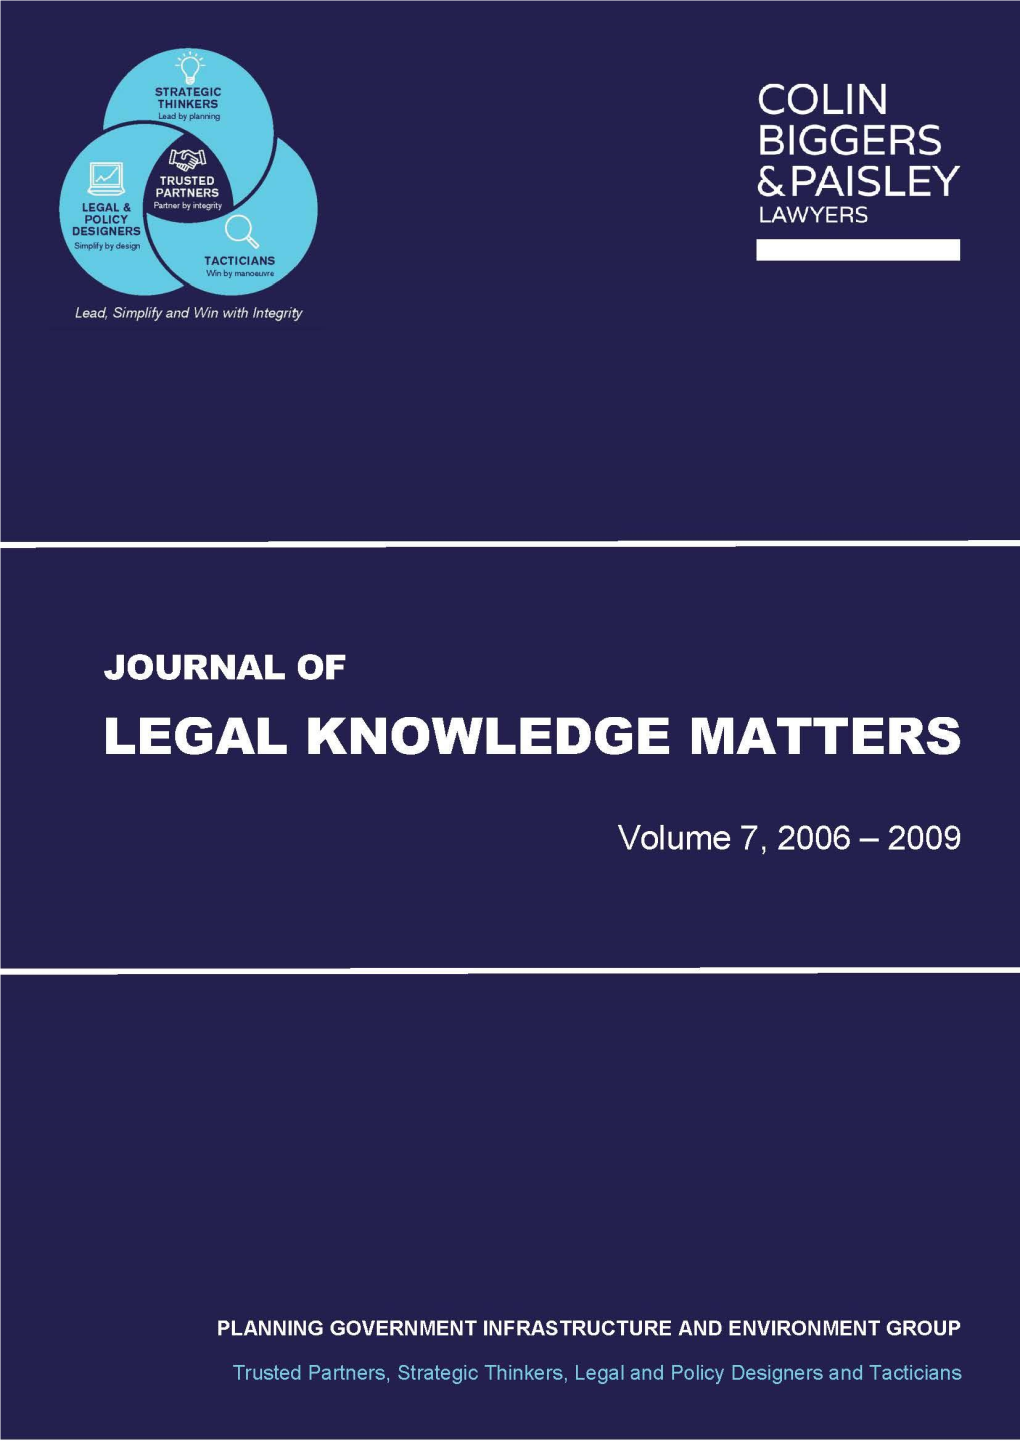 Download Legal Knowledge Matters 2006